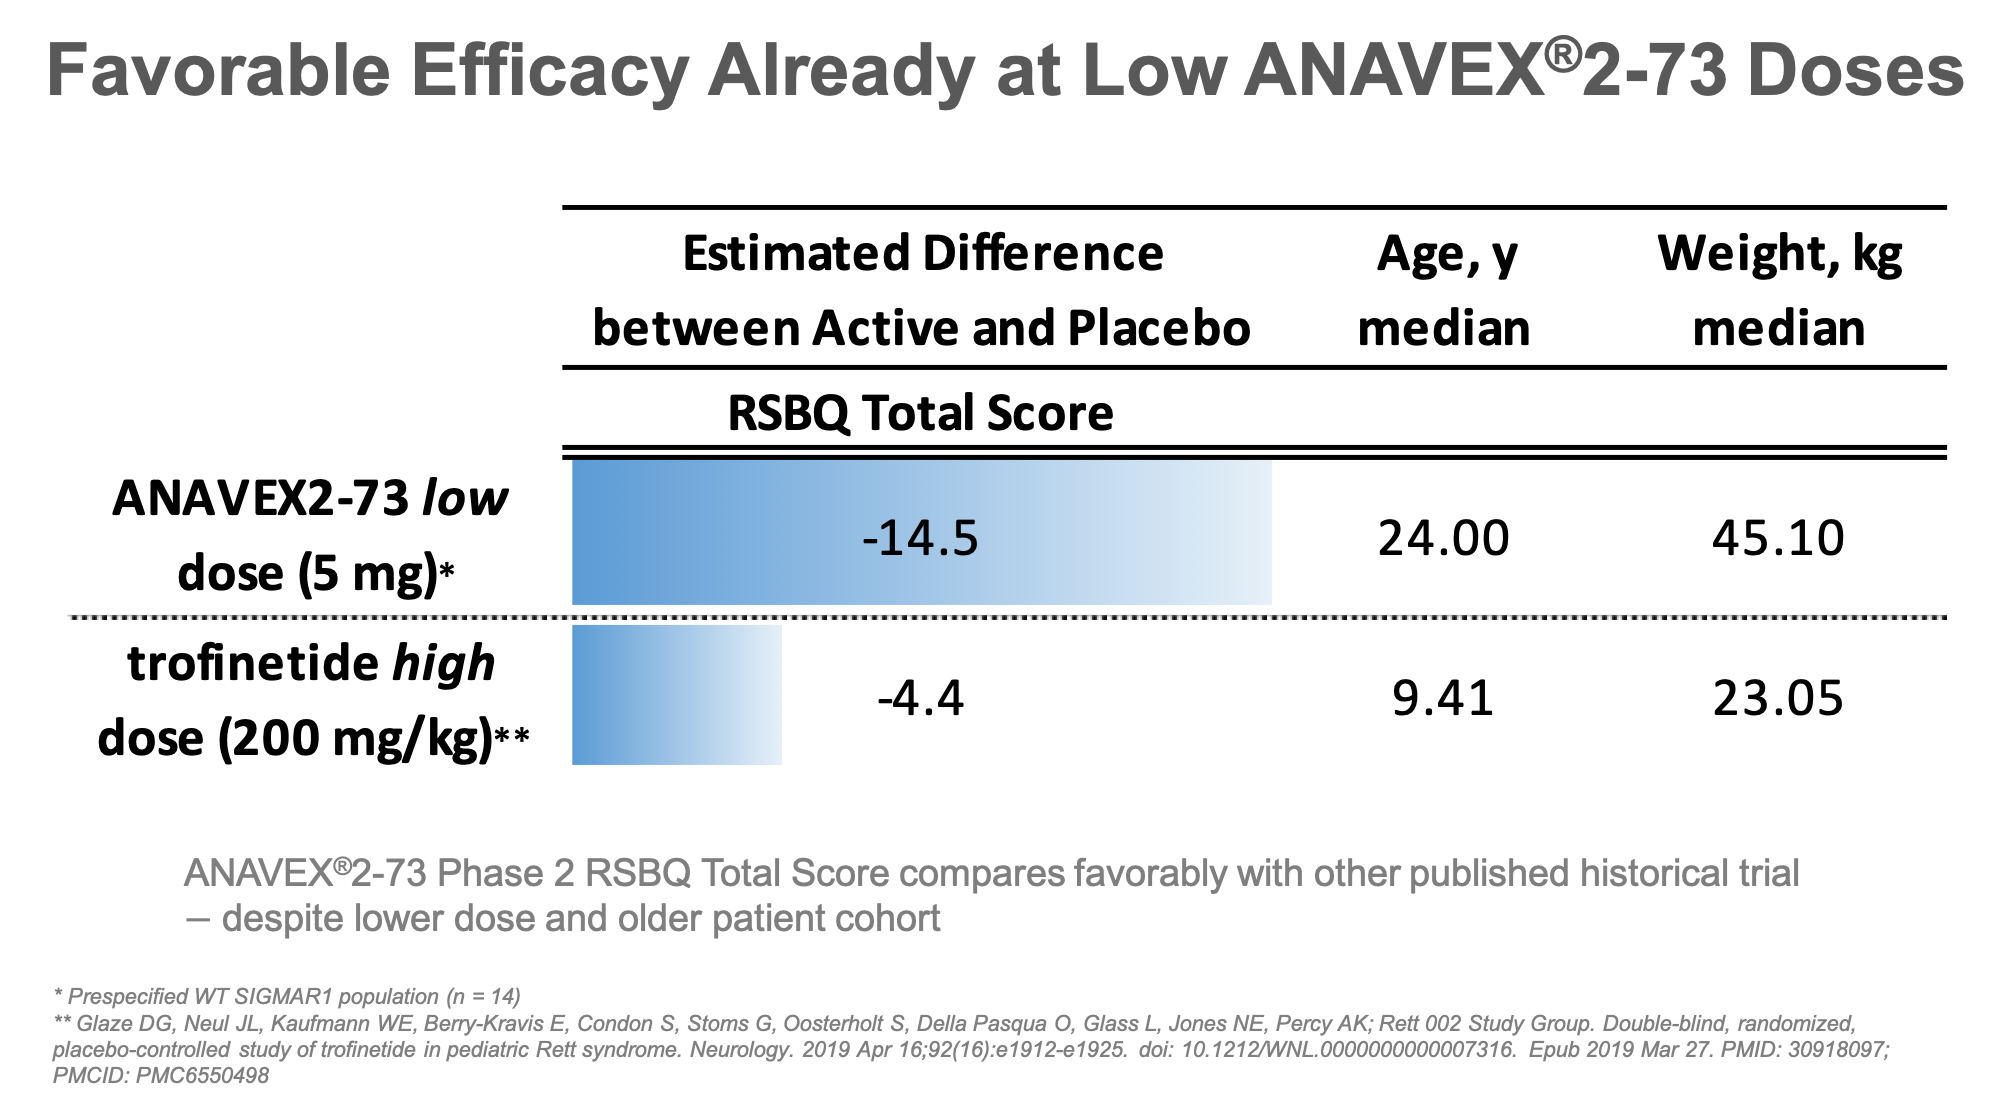 Favorable Efficacy Already at Low ANAVEX®2-73 Doses